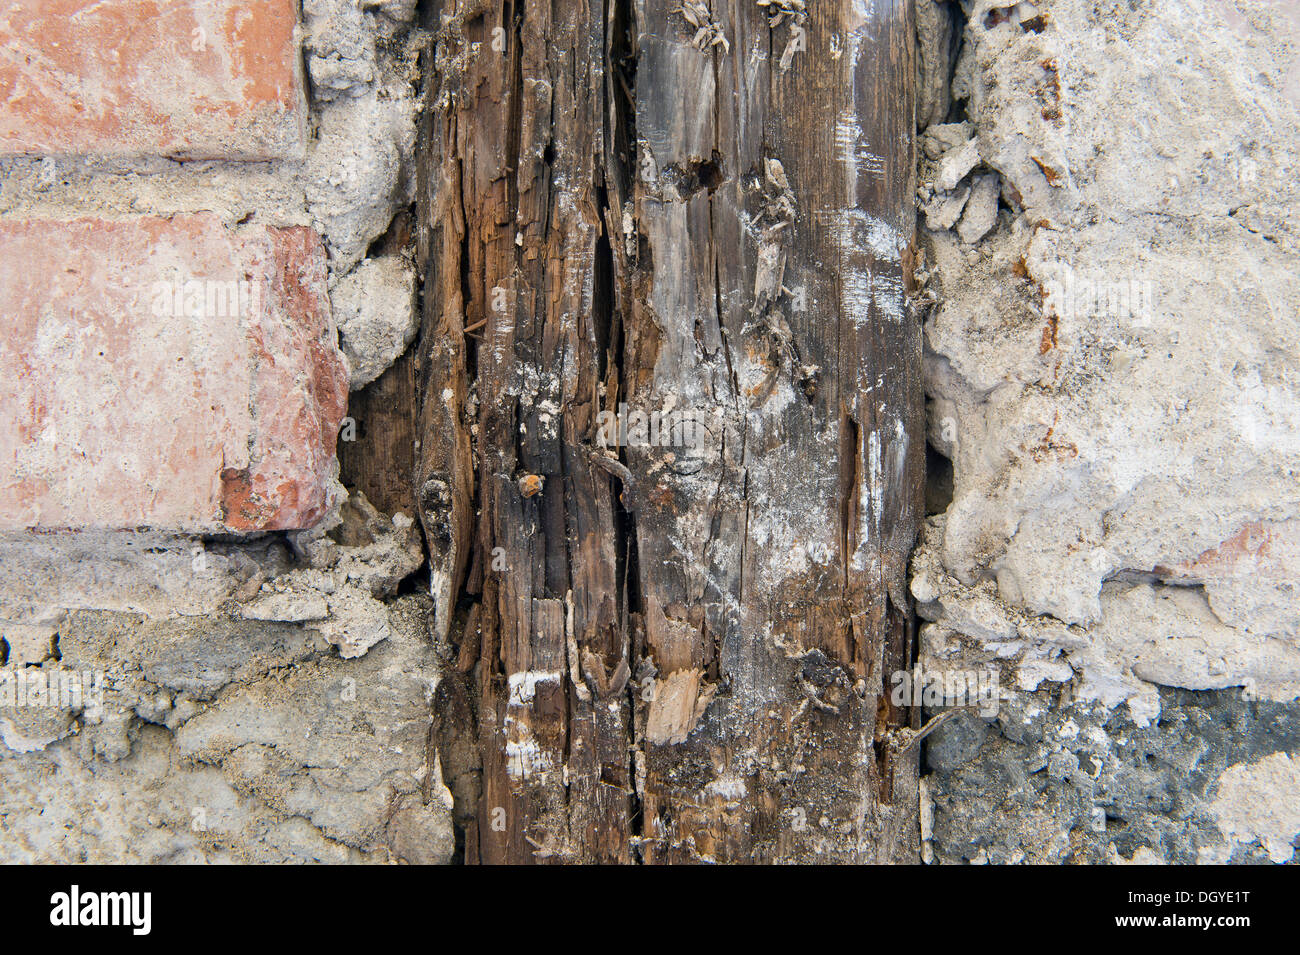 Partially rotted beam and brick in an old building in need of renovation, Stuttgart, Baden-Wuerttemberg Stock Photo